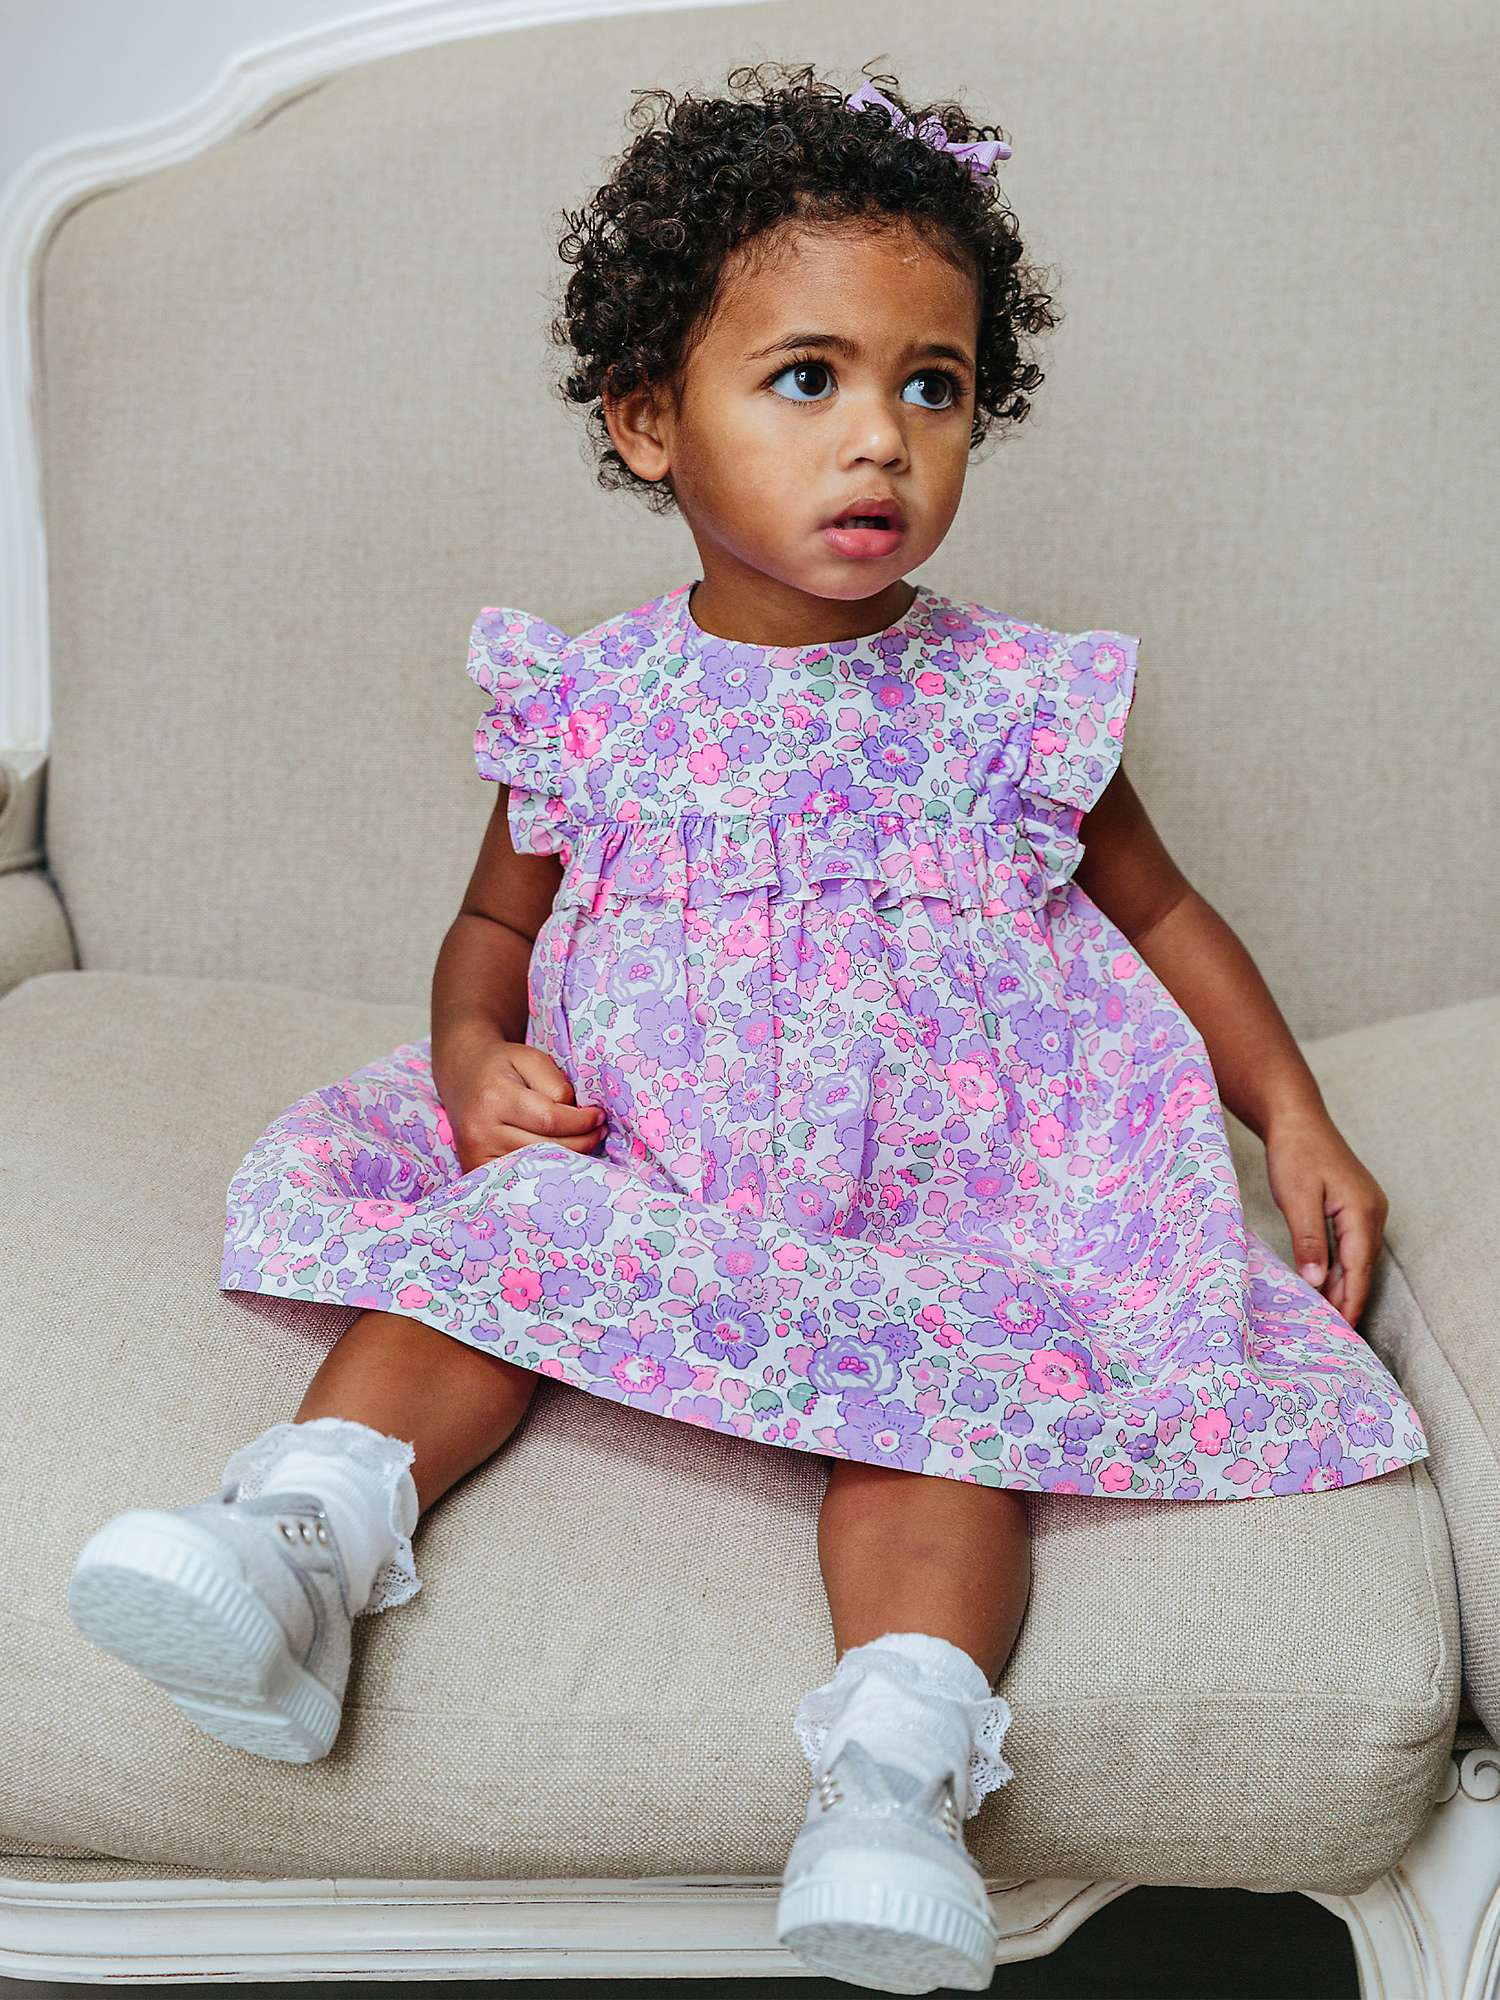 Buy Trotters Baby Liberty Betsy Floral Print Ruffle Dress, Lilac Online at johnlewis.com